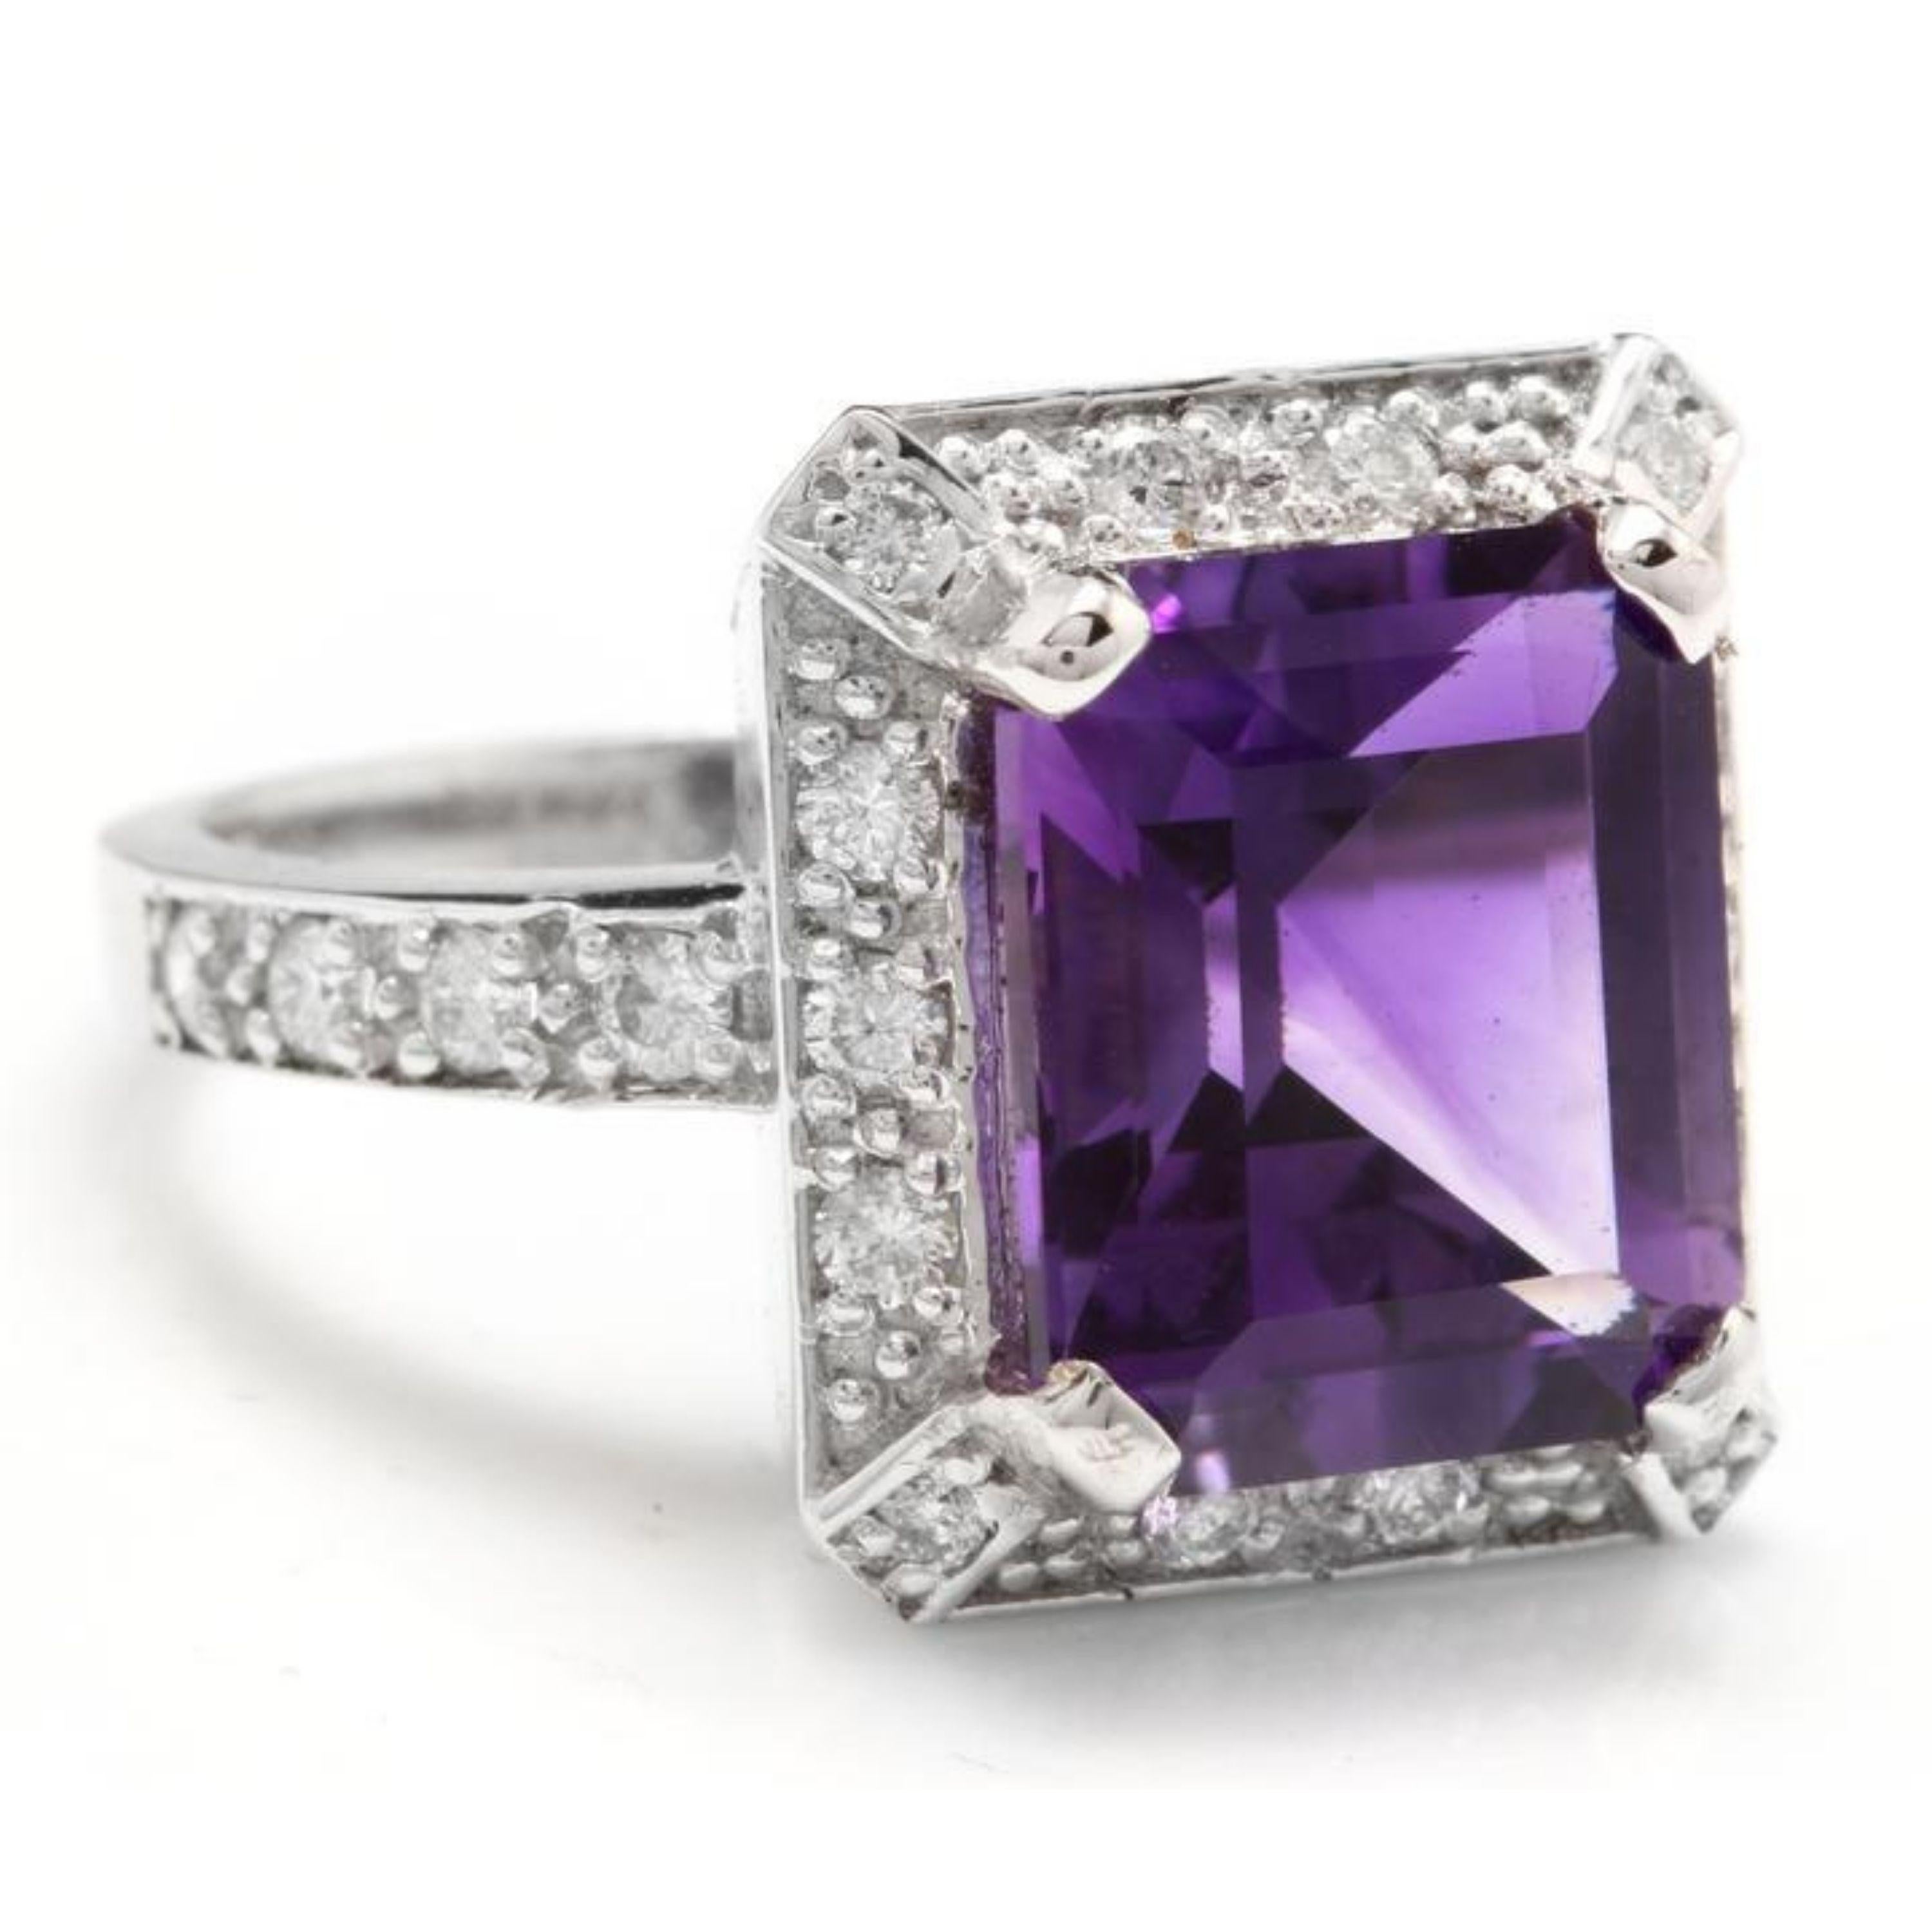 6.05 Carats Impressive Natural Amethyst and Diamond 14K White Gold Ring

Total Natural Amethyst Weight is: Approx. 5.50 Carats

Amethyst Measures: Approx. 12.00 x 10.00mm

Natural Round Diamonds Weight: Approx. 0.55 Carats (color G-H / Clarity